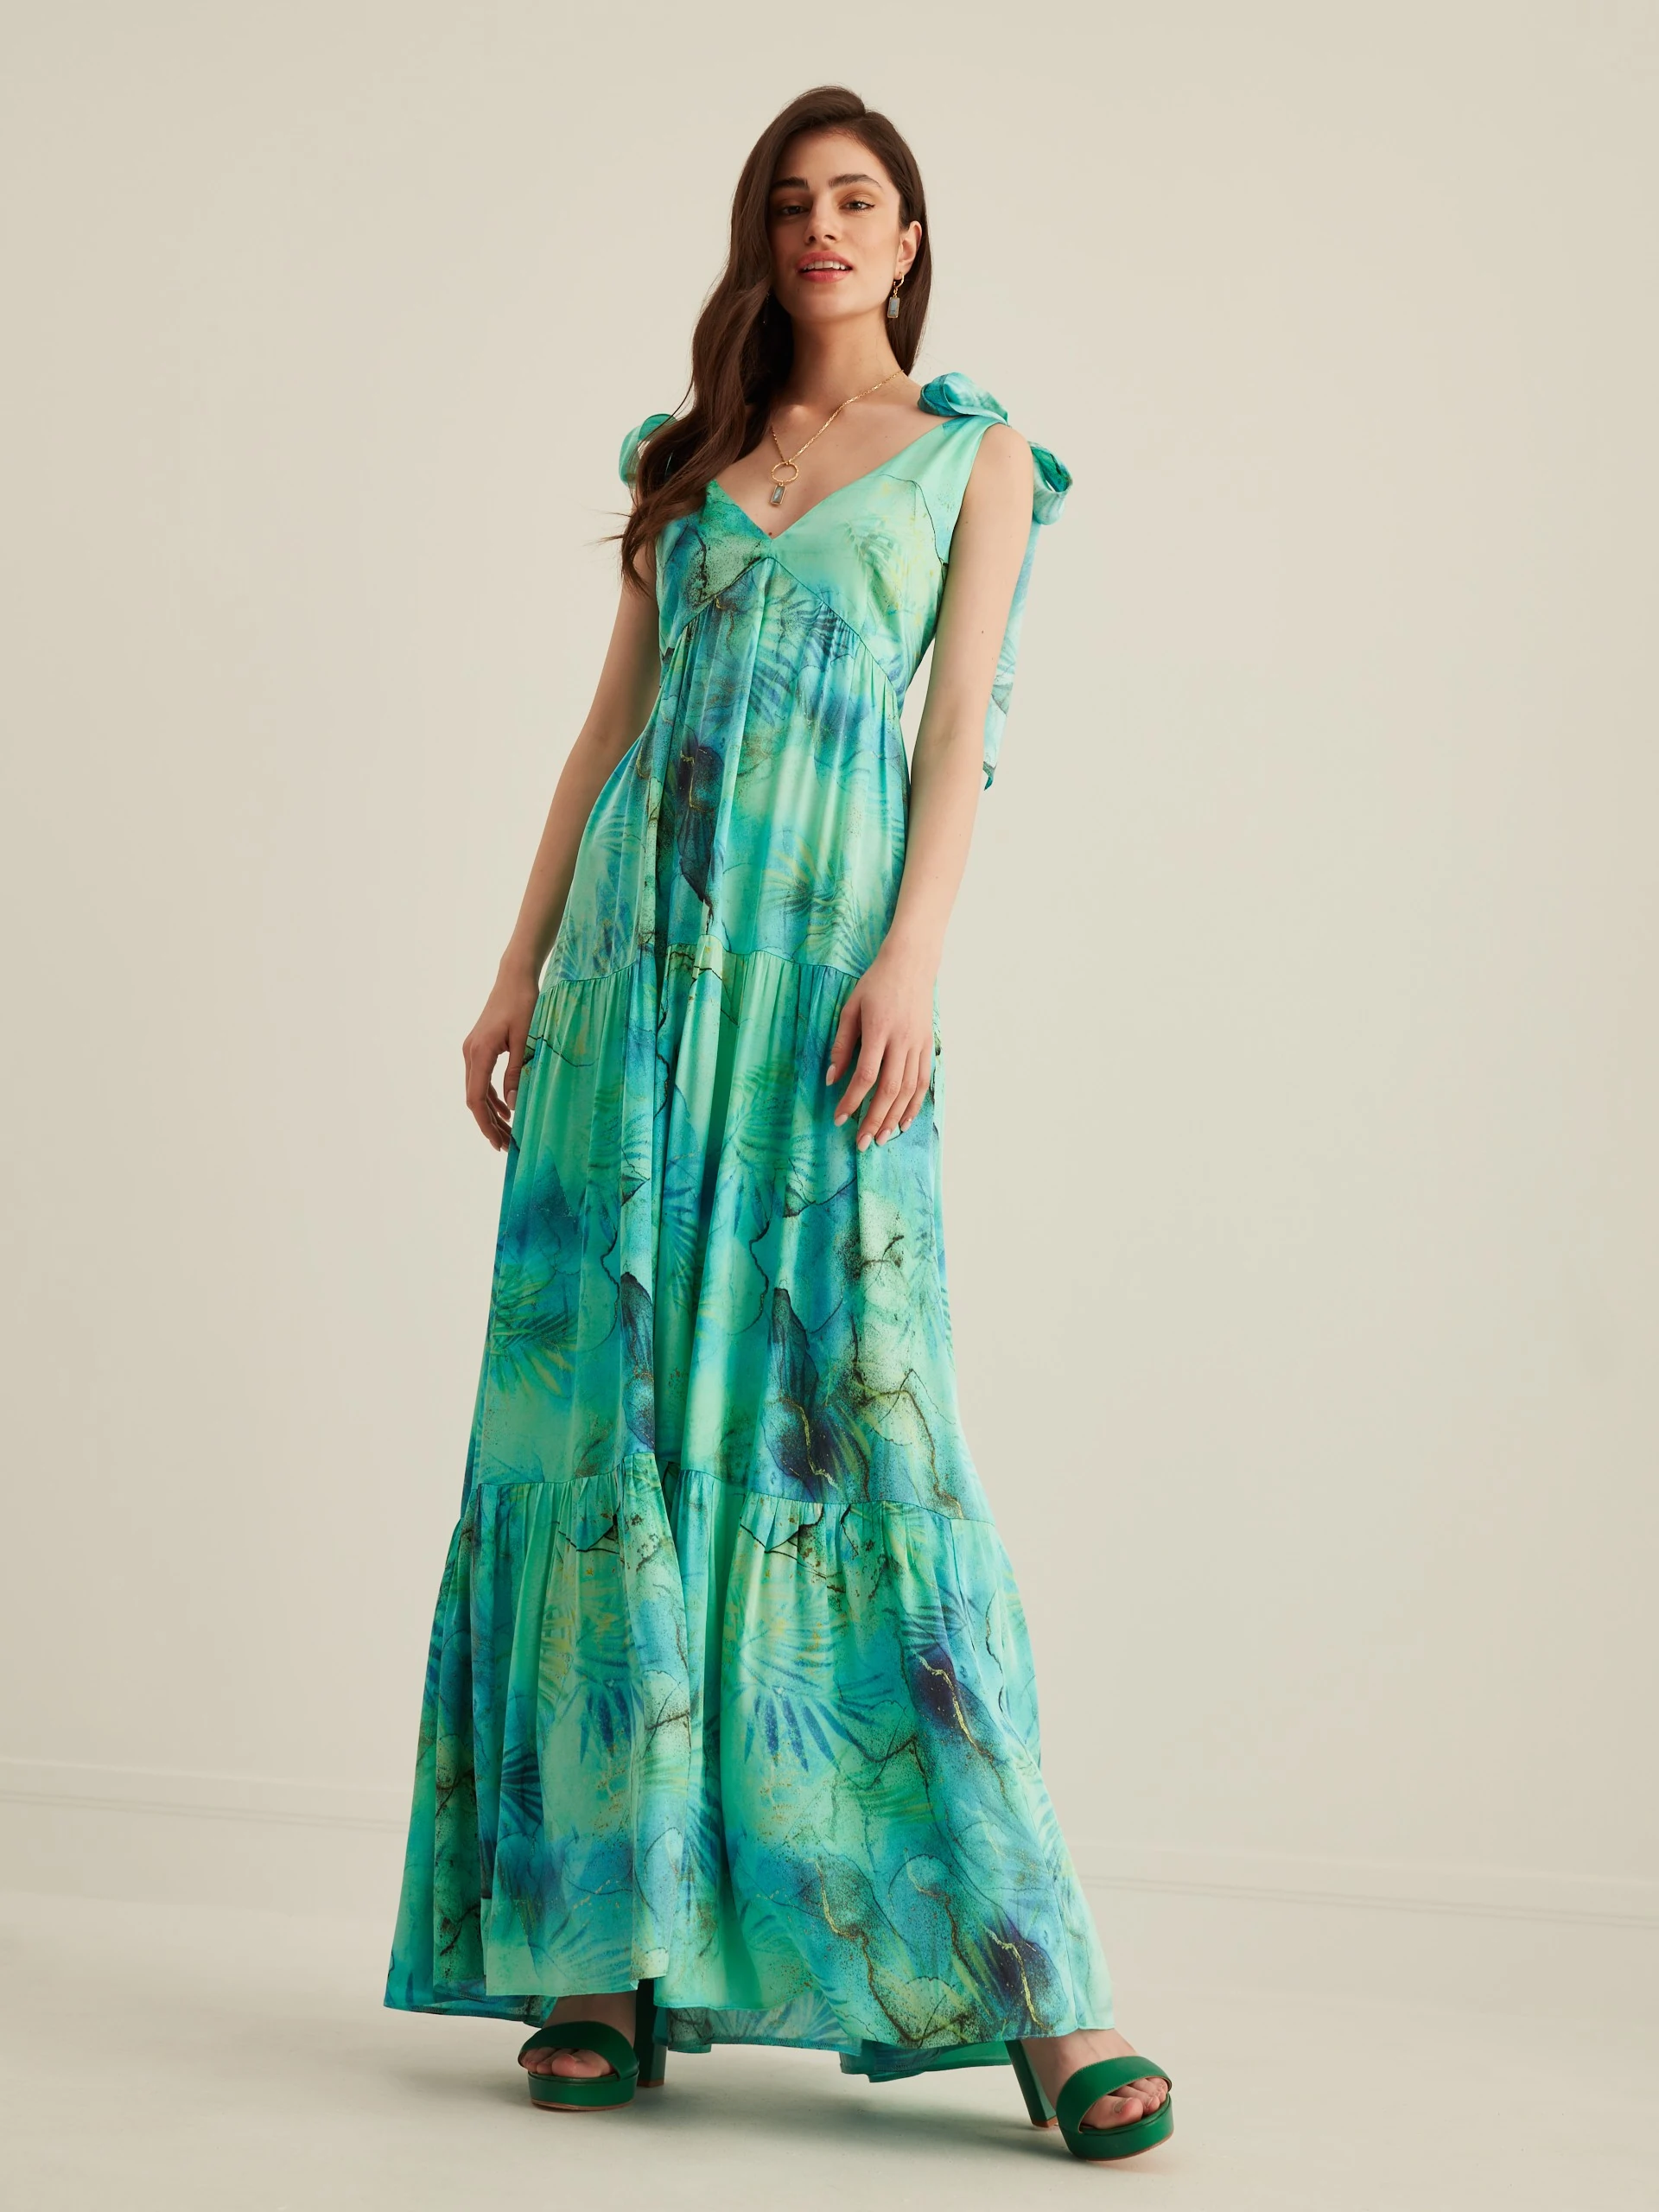 LONG DRESS WITH SHOULDER TIES